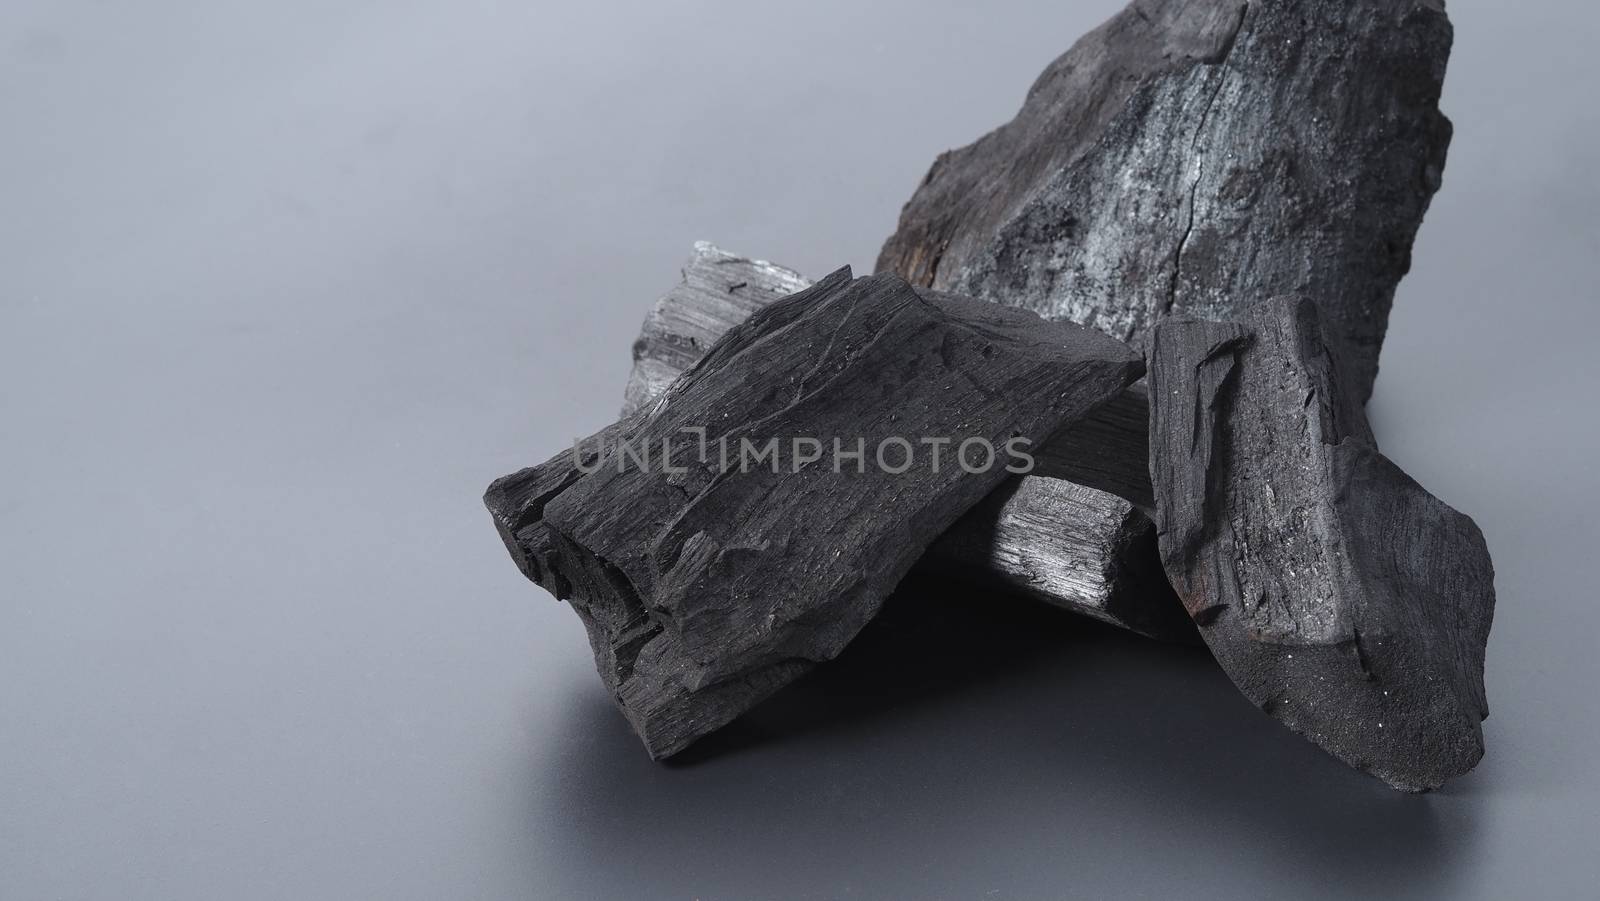 Group of charcoal black color made from real wood in studio close-up shot which use for cooking or absorb odor in room or refrigerator. And use in some cosmetic industry.